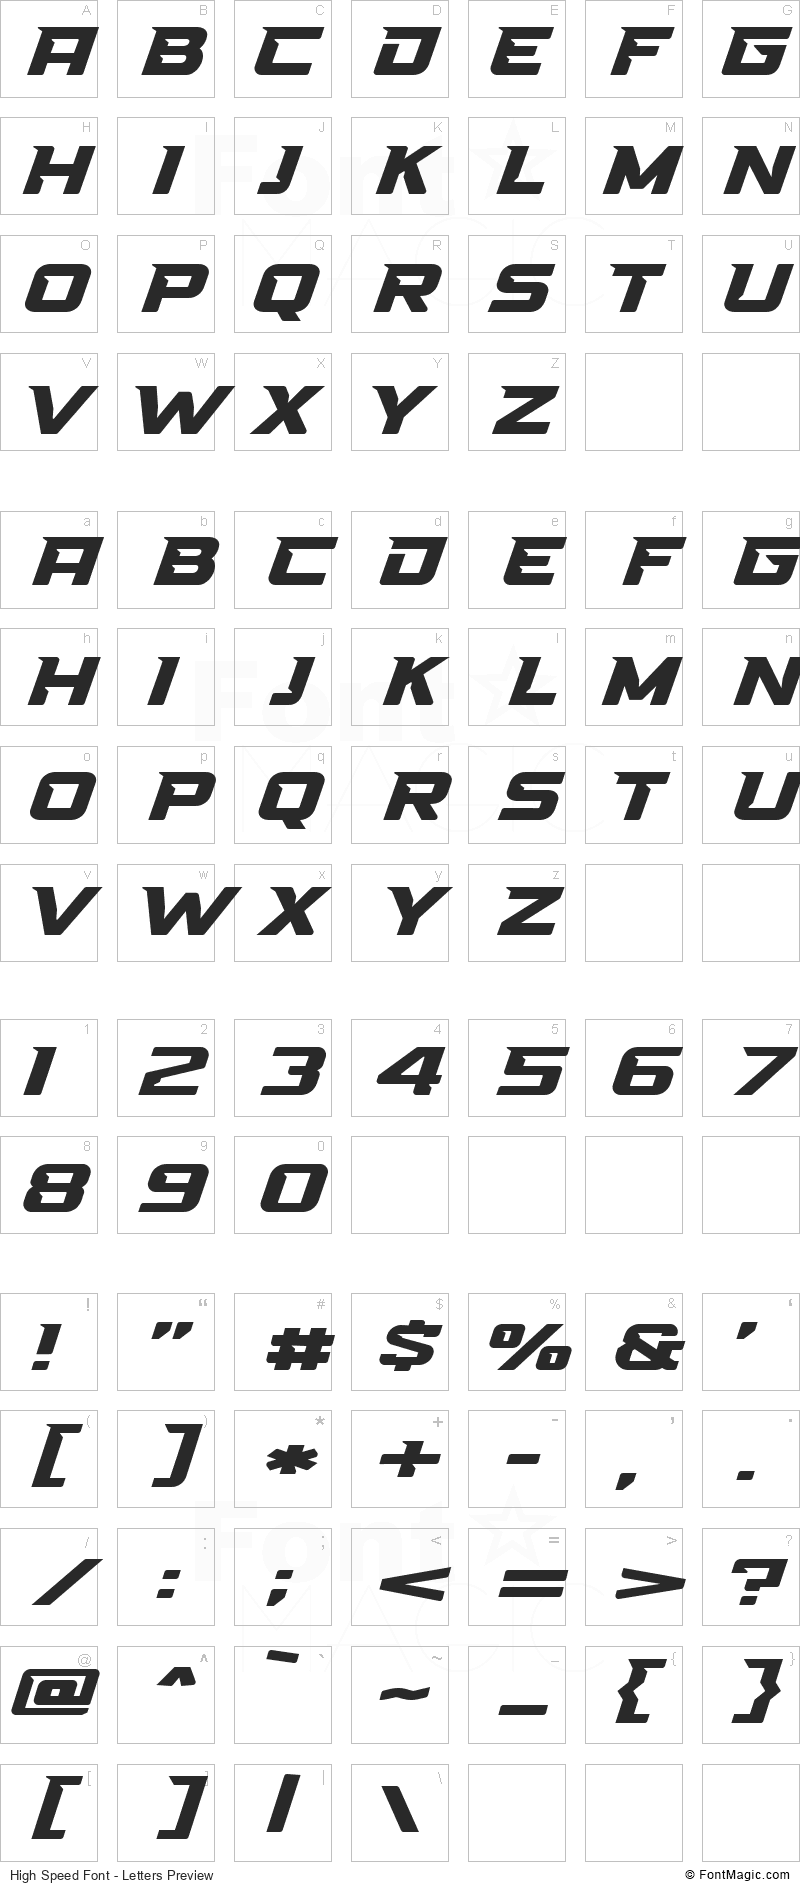 High Speed Font - All Latters Preview Chart